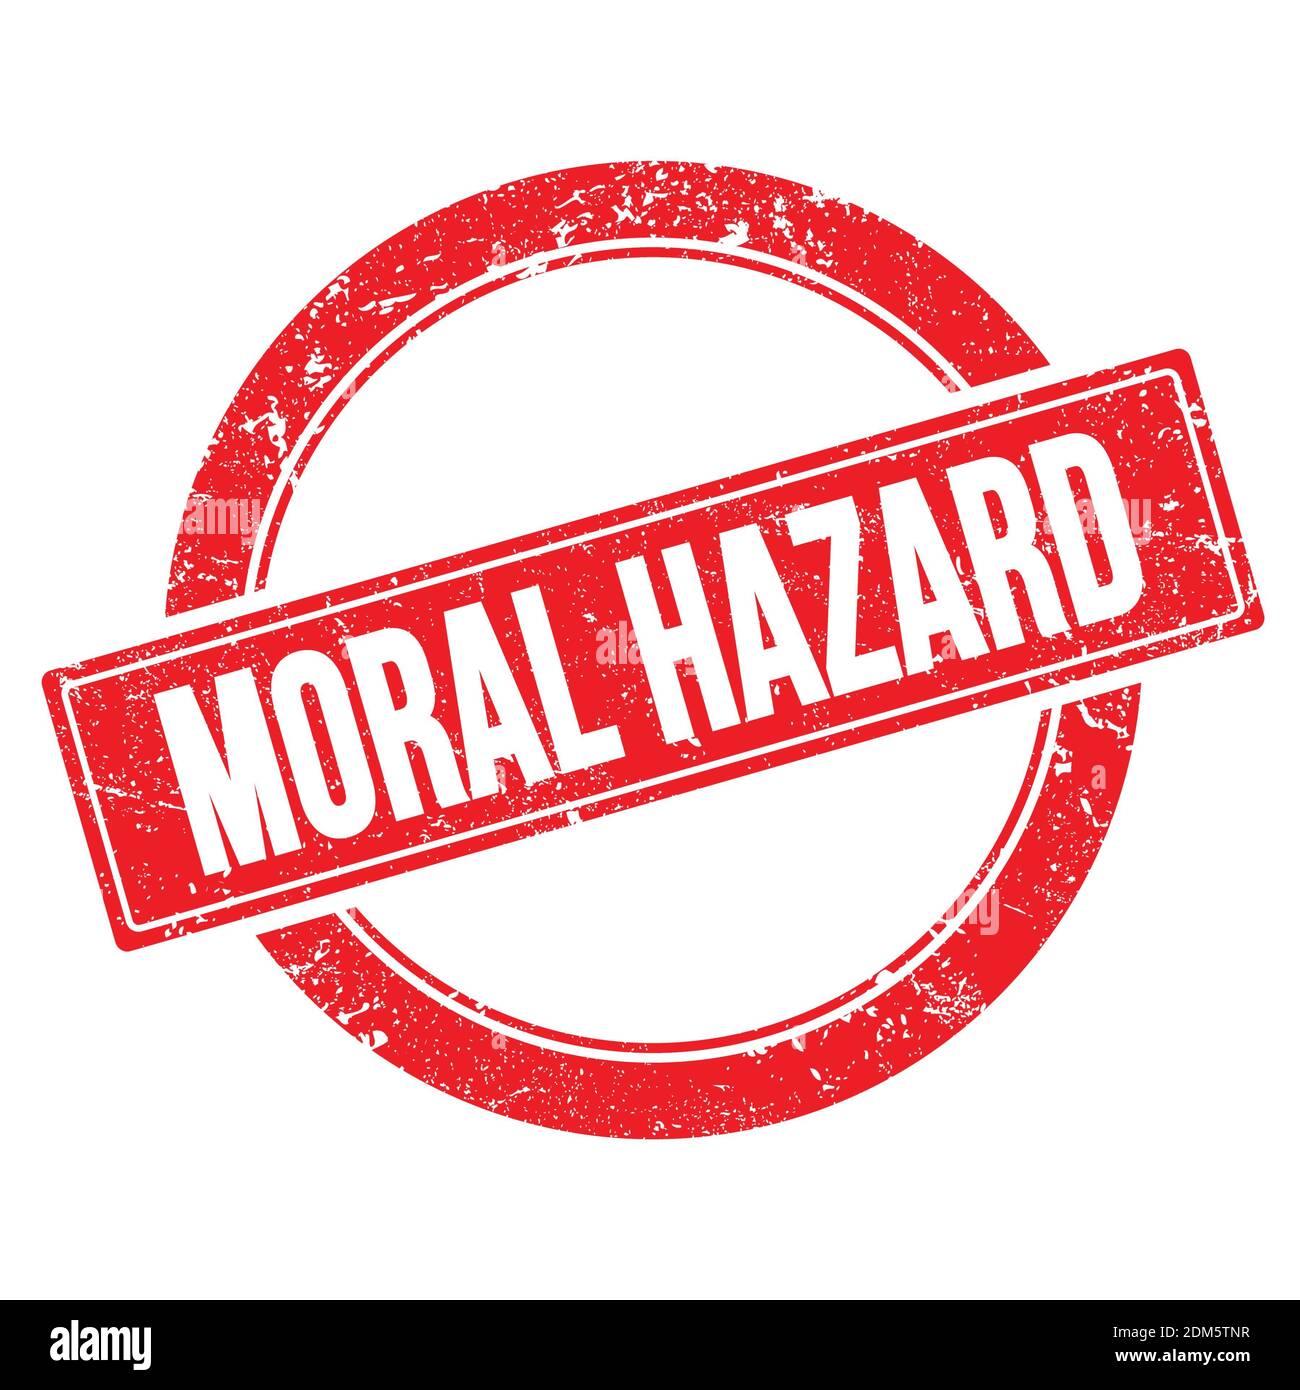 MORAL HAZARD text on red grungy round vintage stamp. Stock Photo